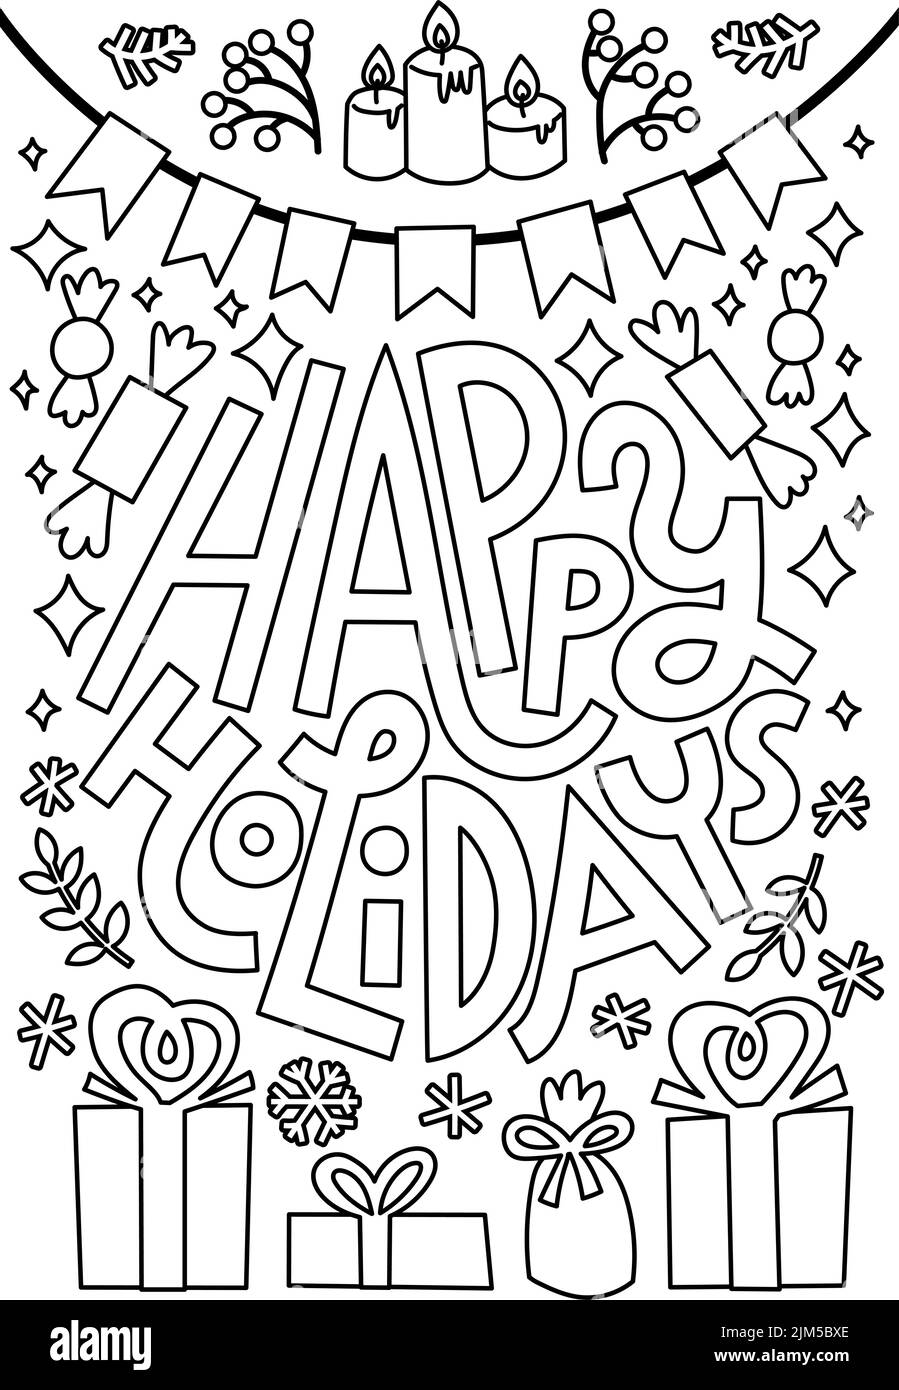 Happy holidays coloring book page Stock Vector